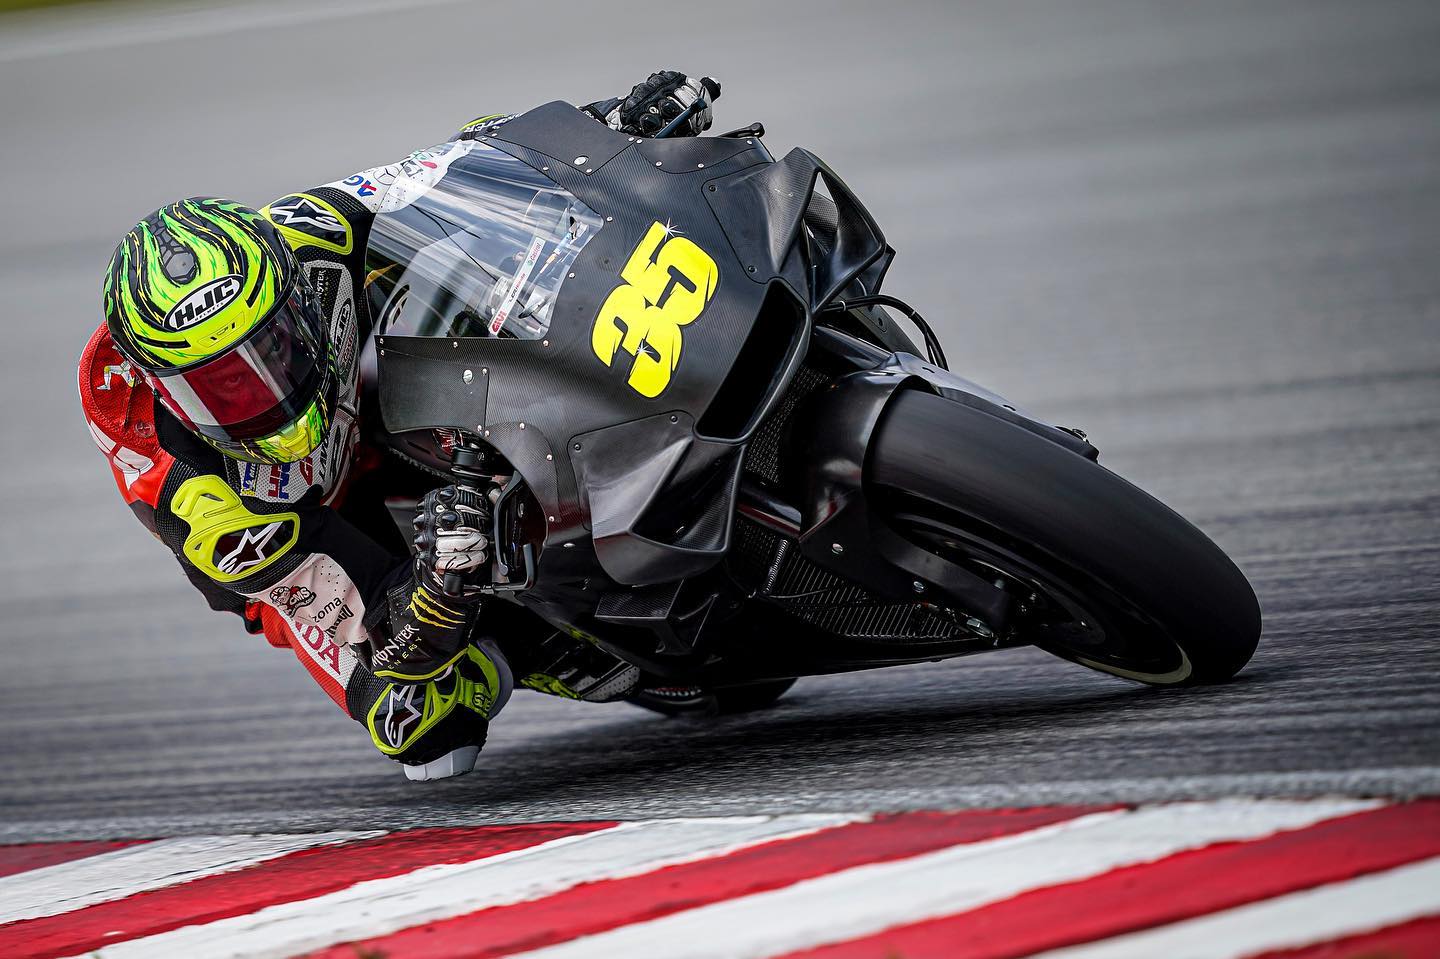 Crutchlow completes productive test in Sepang as second